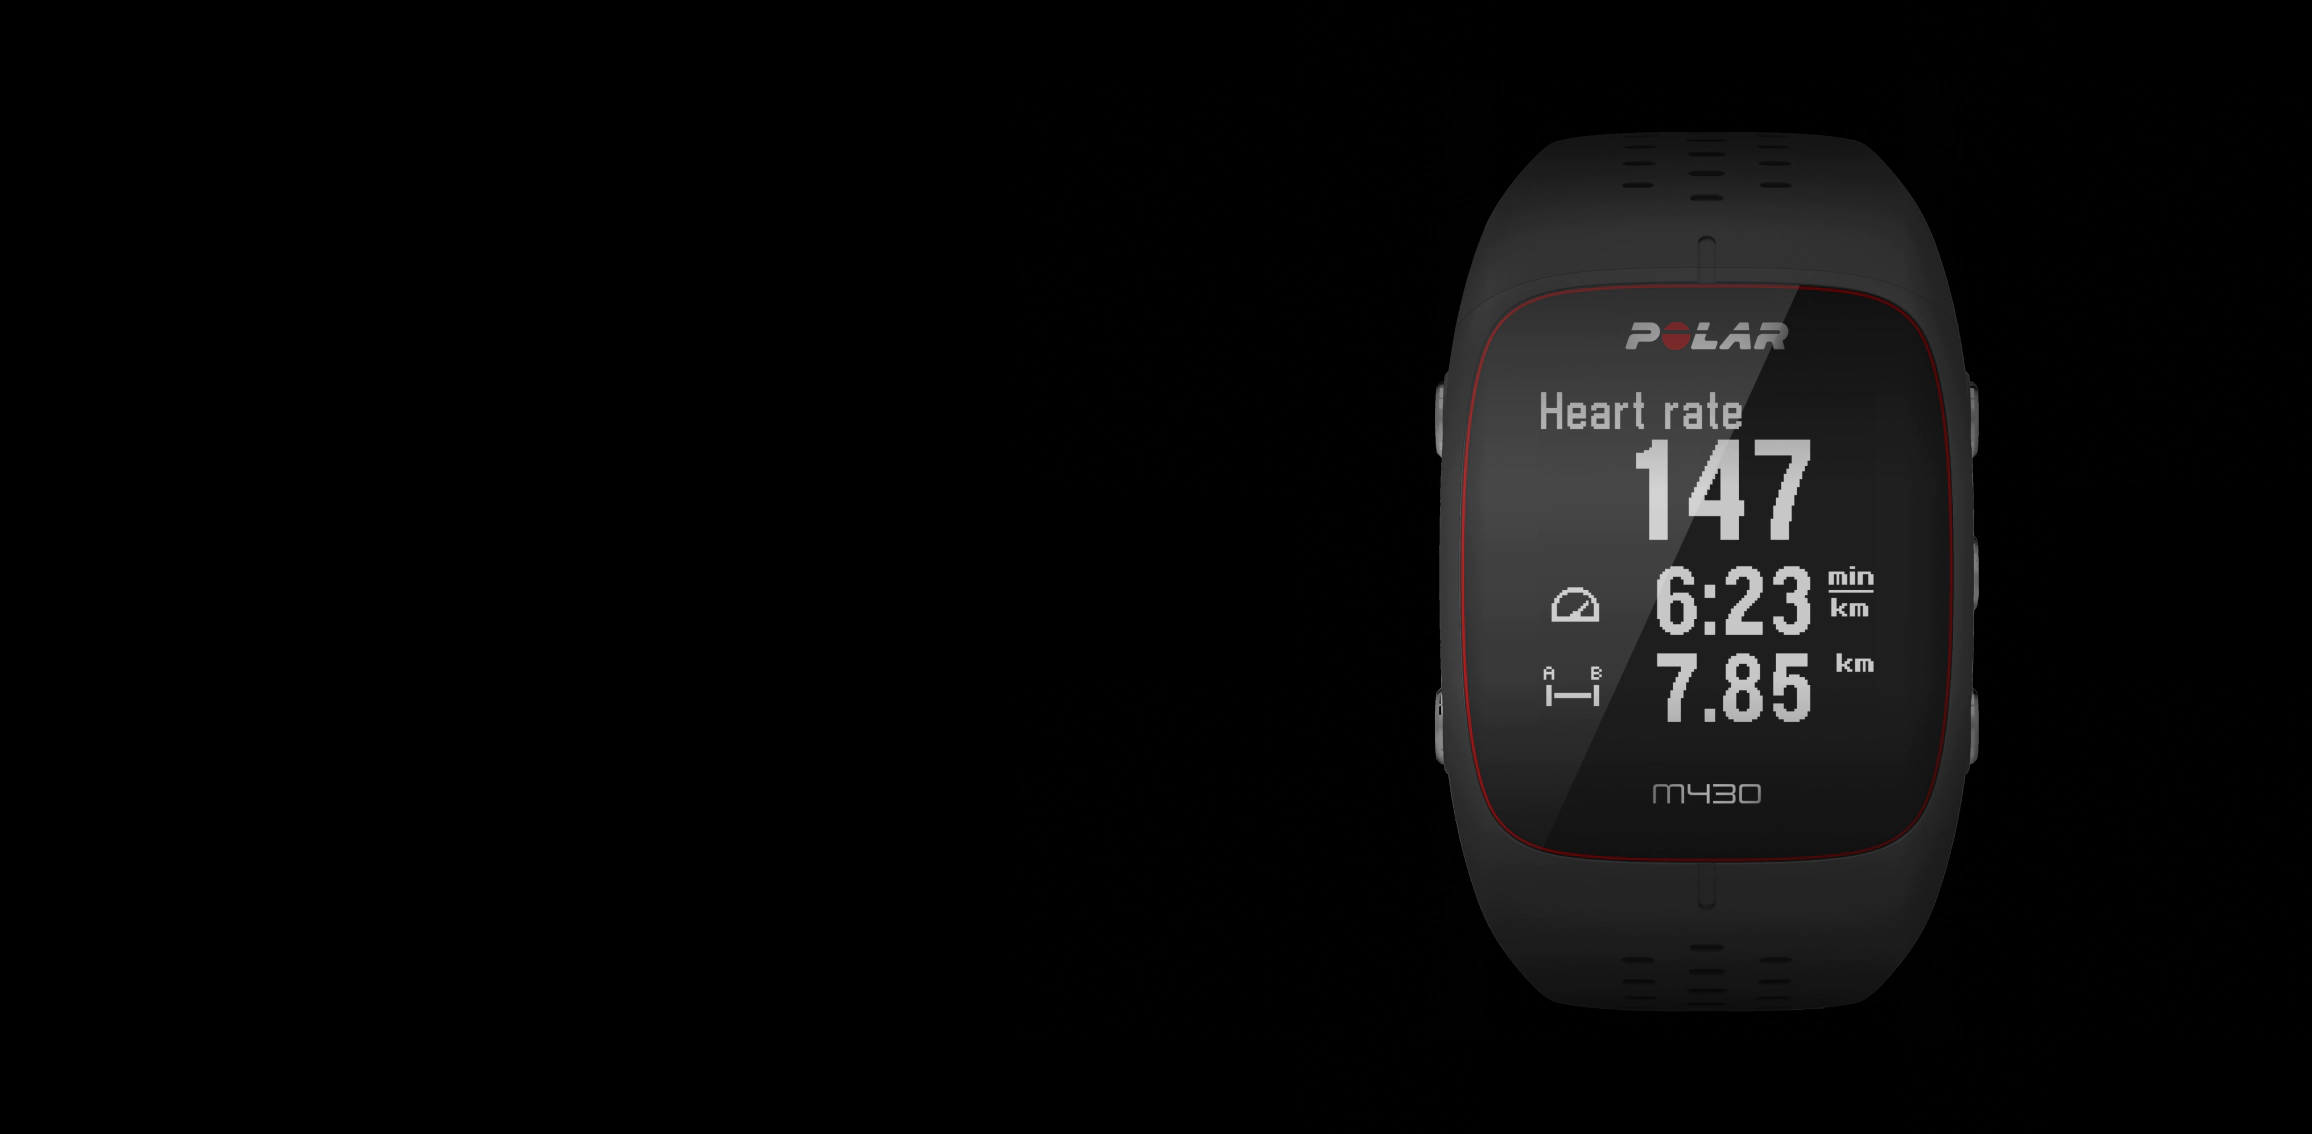 Polar M430 | Running watch with GPS tracker and pace | Polar USA